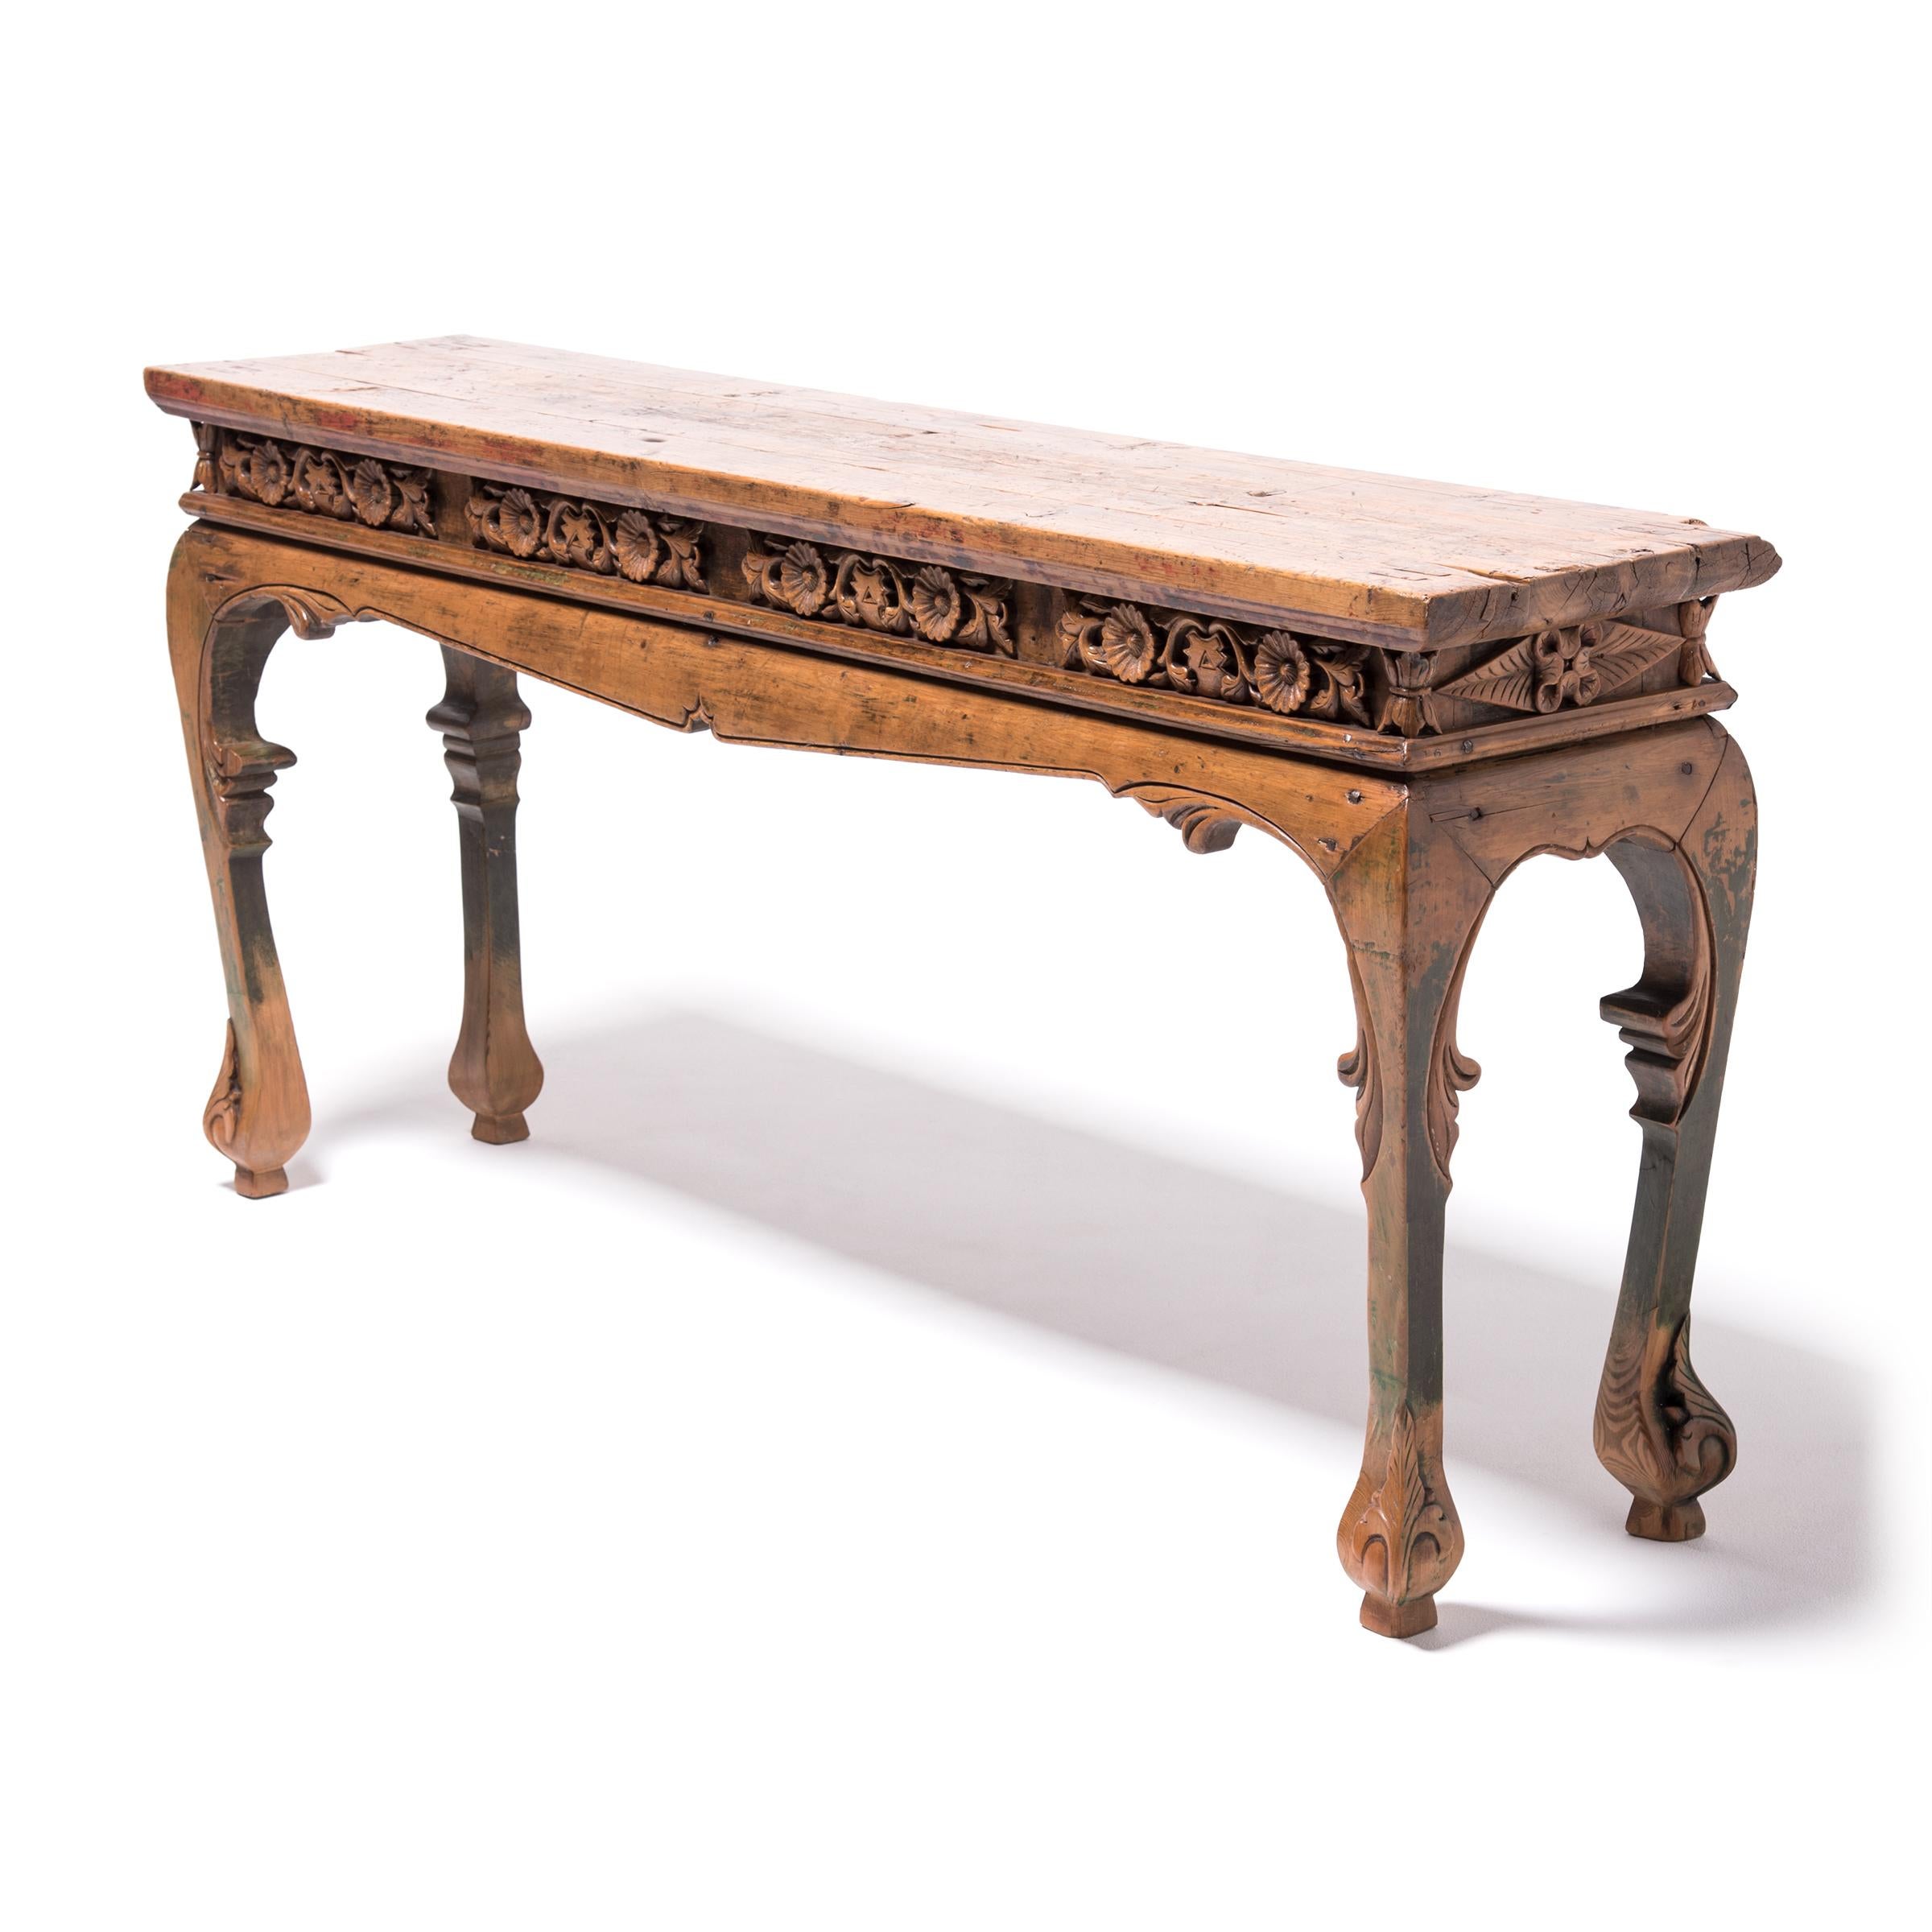 Cultivated in all parts of China, the chrysanthemum is esteemed for its variety of forms and rich colors. This favored flower is carved in a graceful repeat motif on the apron of this exquisitely crafted 19th century pine wood table, complemented by